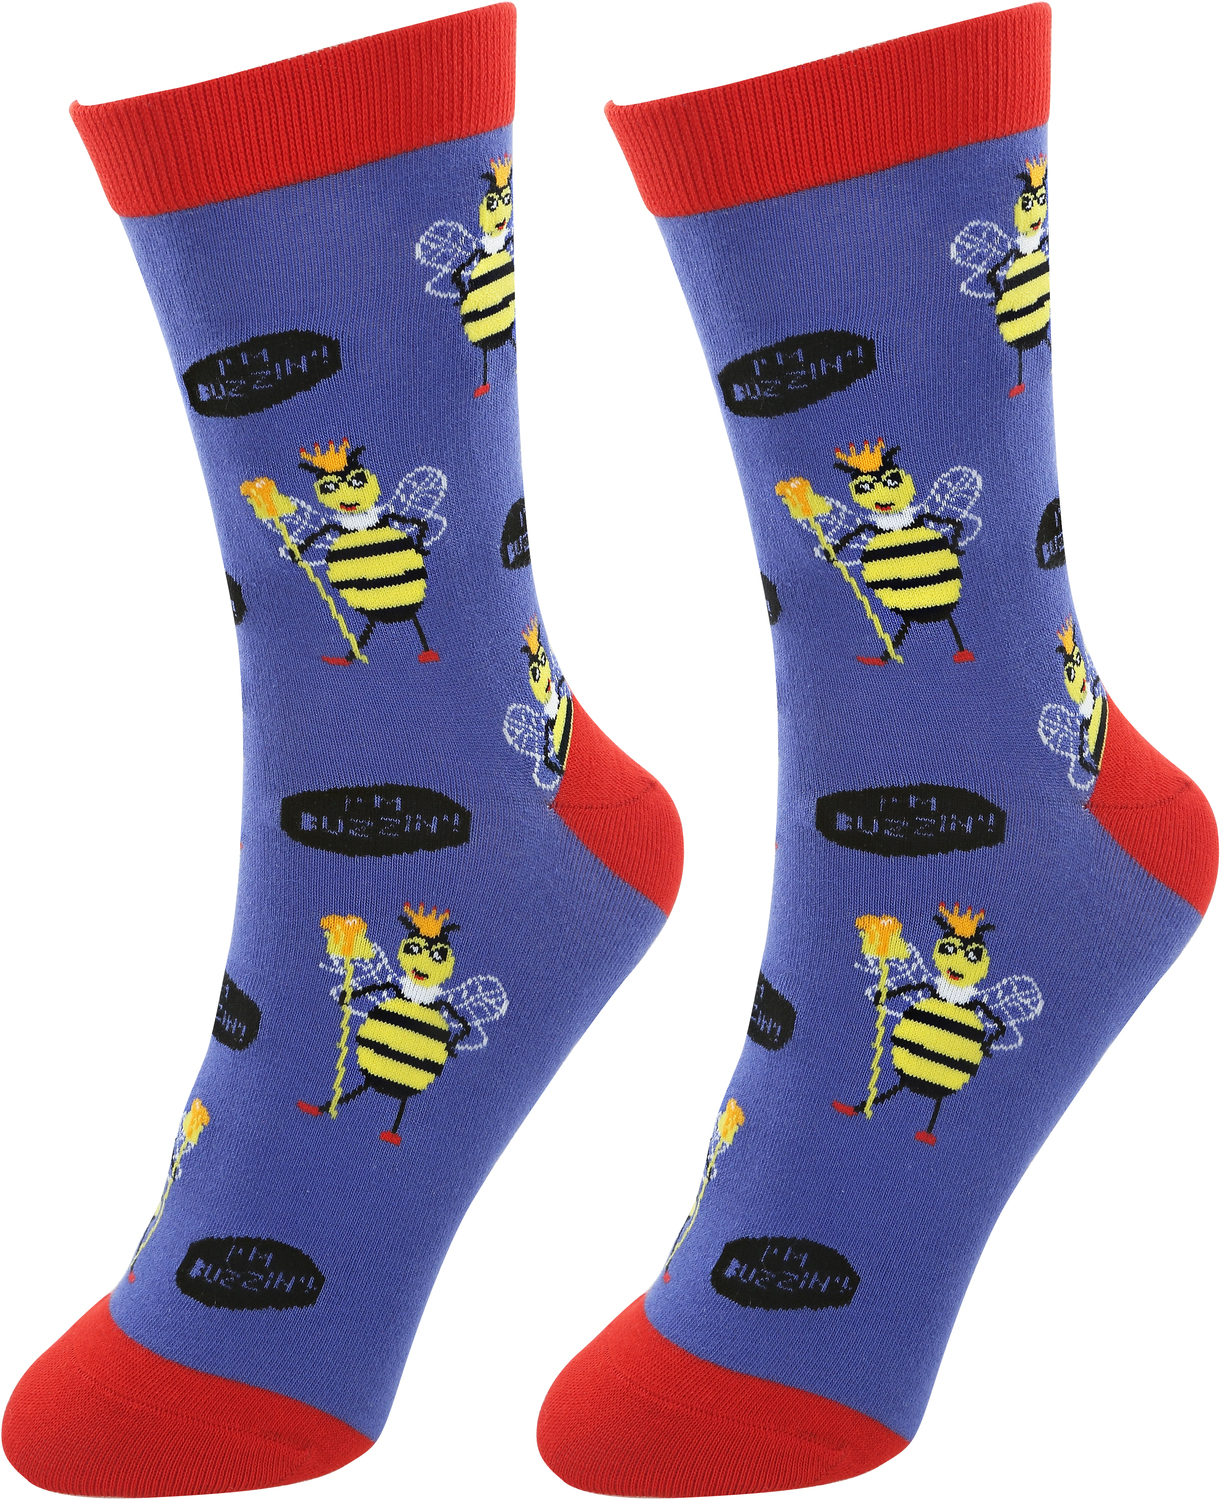 Buzz Off by Fugly Friends - Buzz Off - S/M Unisex Cotton Blend Sock